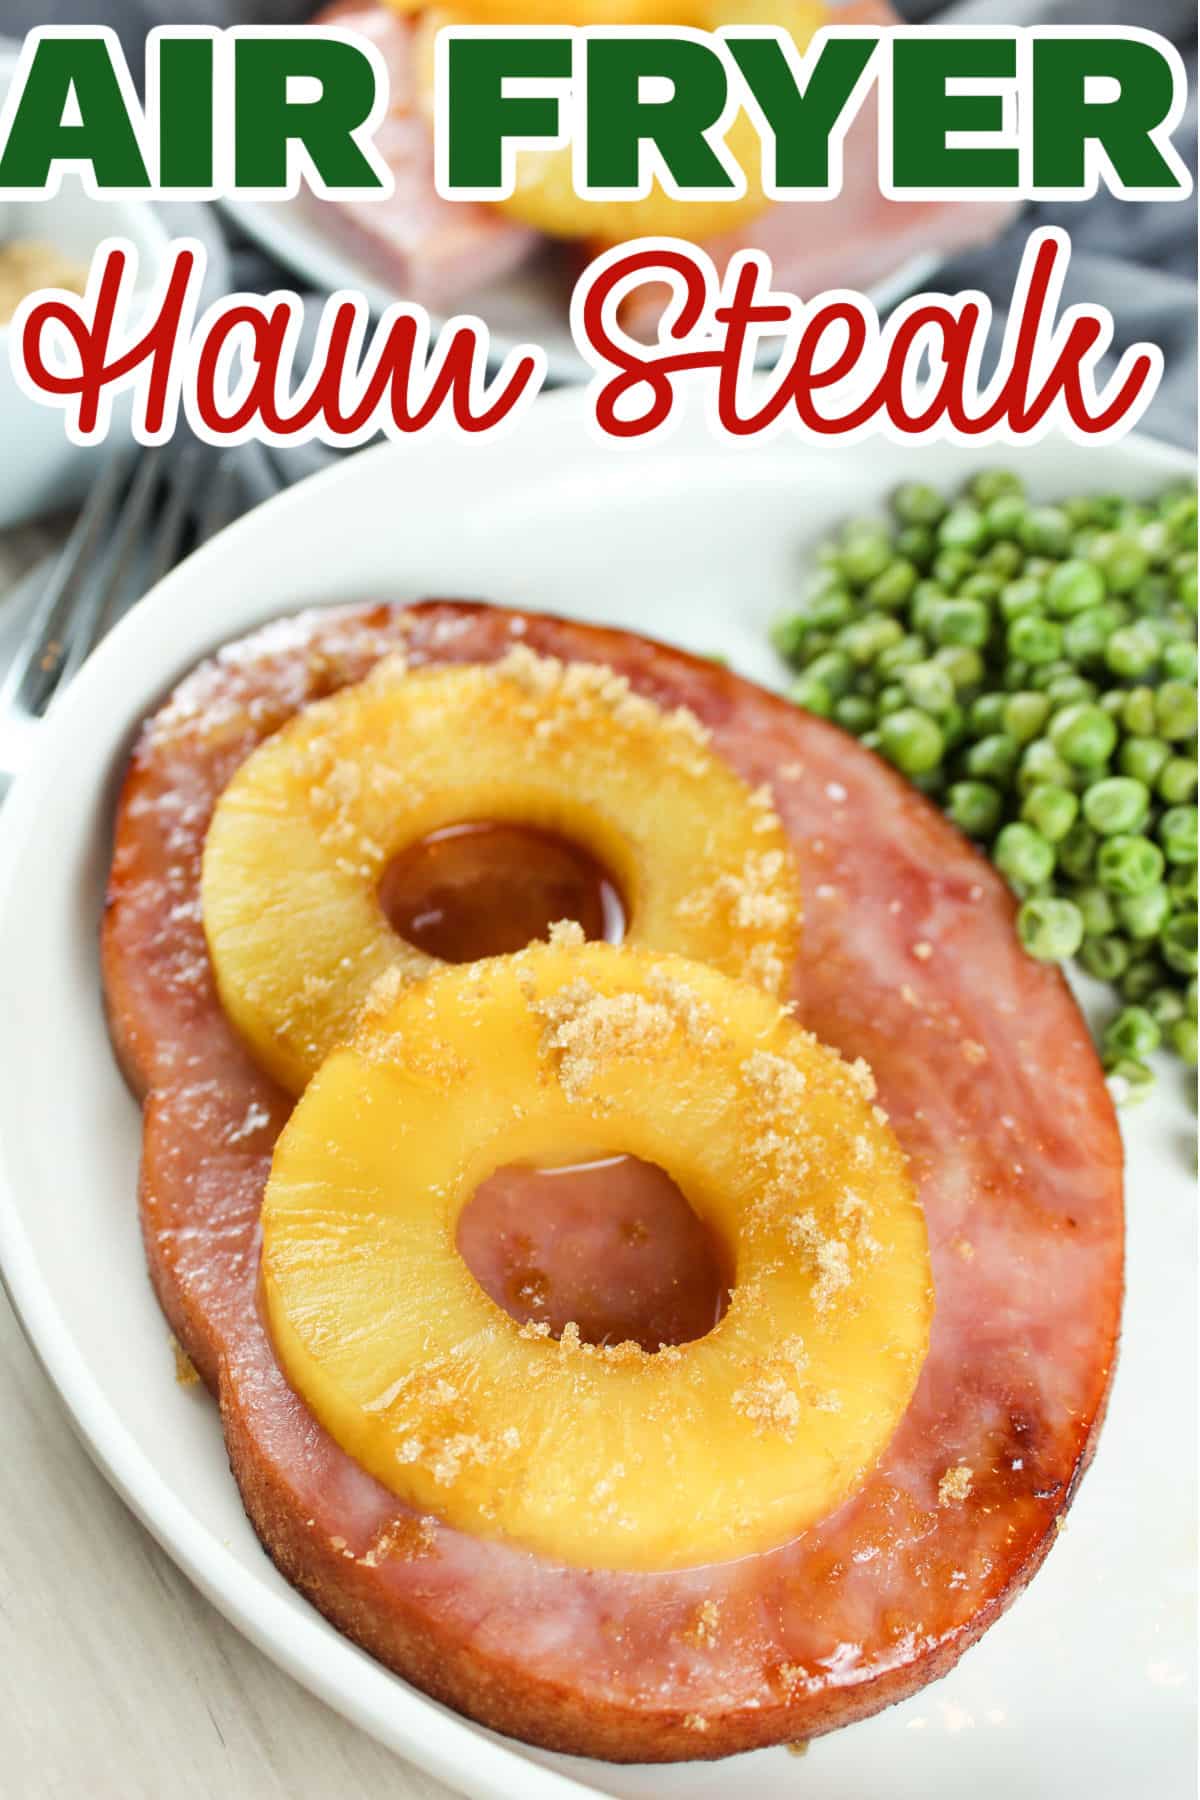 Air Fryer Ham steak is one of the most affordable dinners you can make. Because ham is already cooked, you can heat it up in just 10 minutes. Topped with brown sugar and pineapple - this dish brings the flavor of the holidays any time of year! via @foodhussy